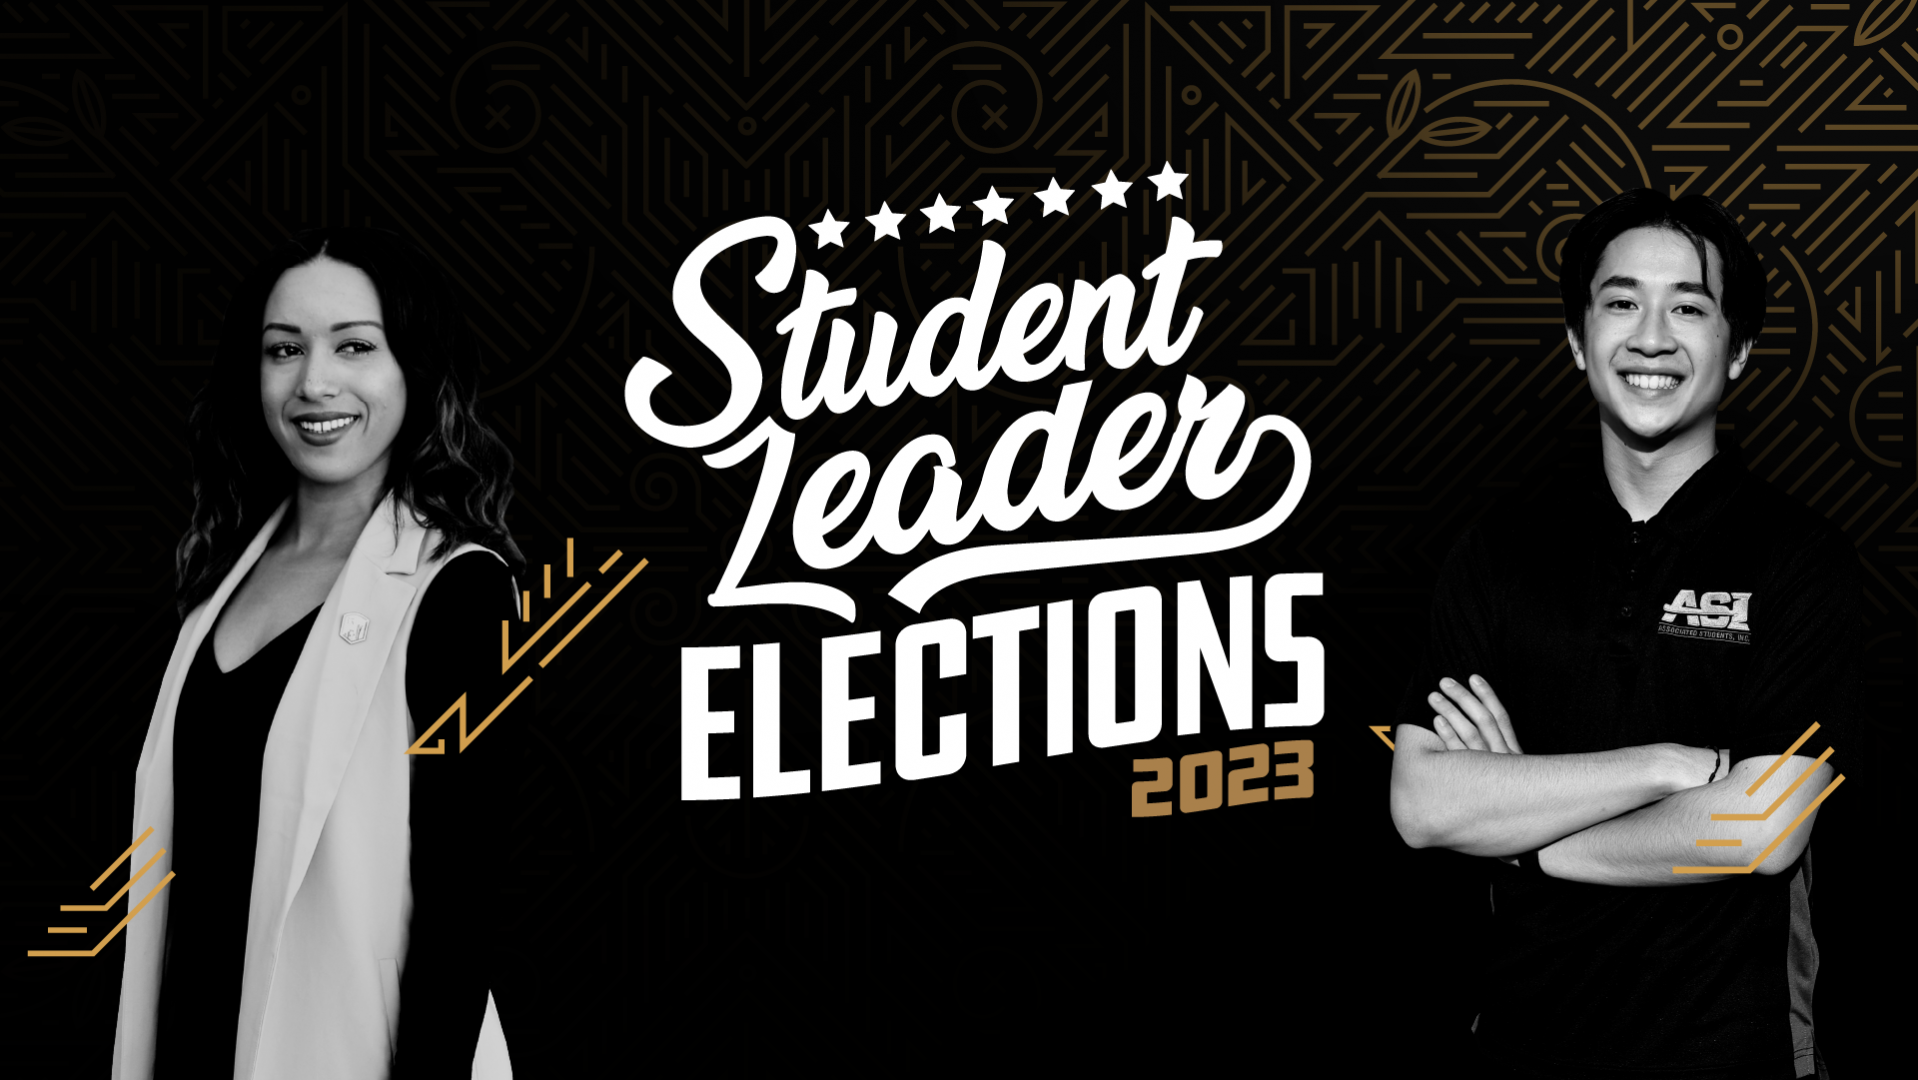 Student Leader Elections 2